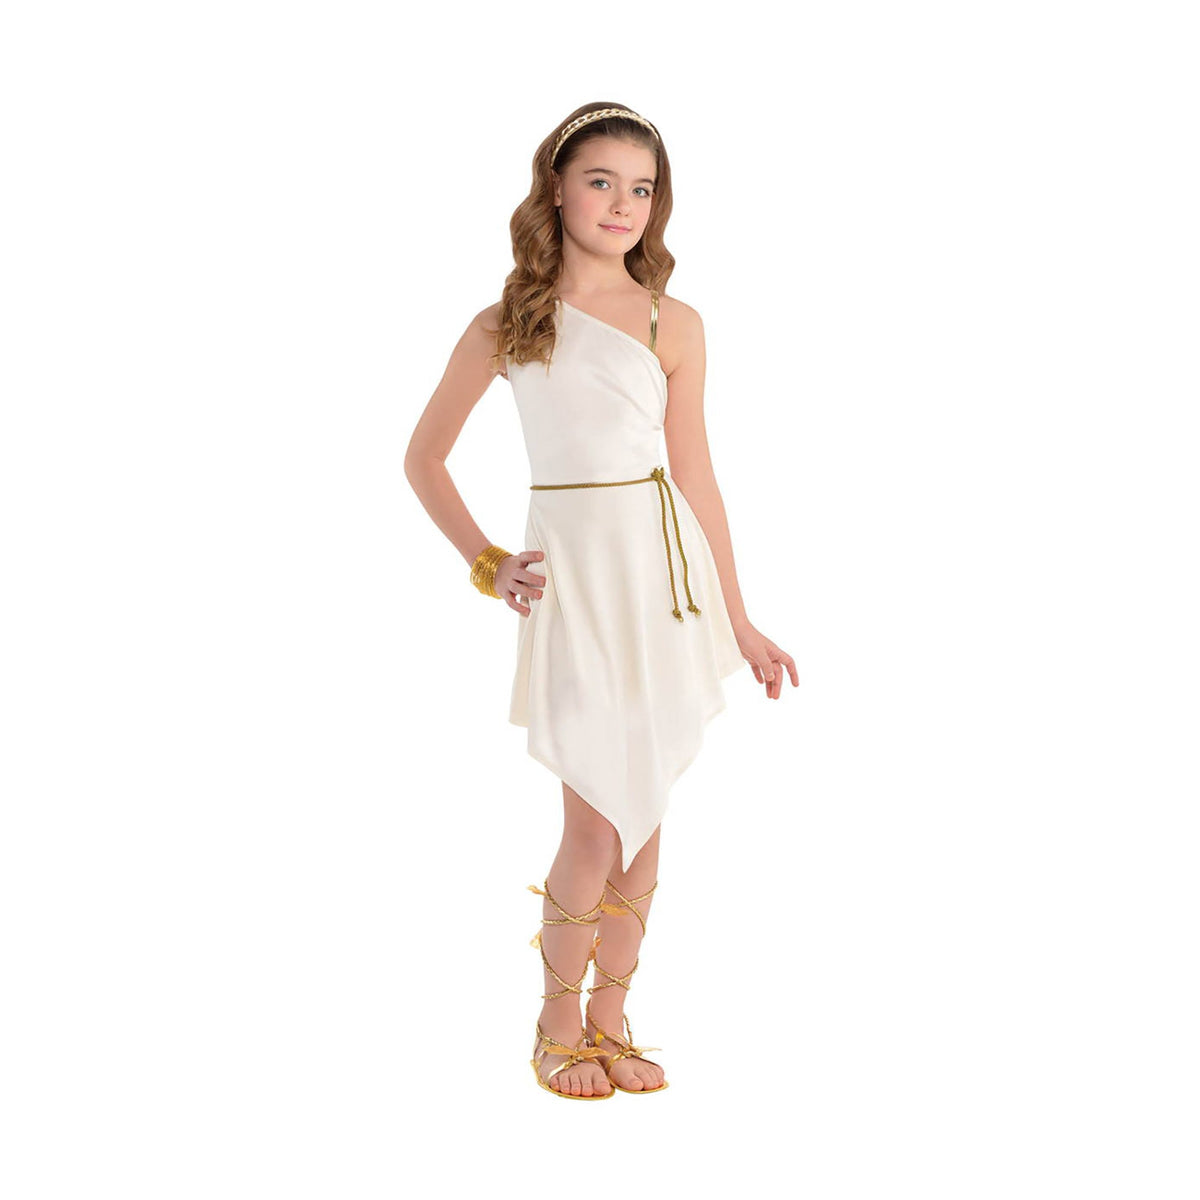 PARTY TIME MFG New Year Goddess Dress Costume for Kids